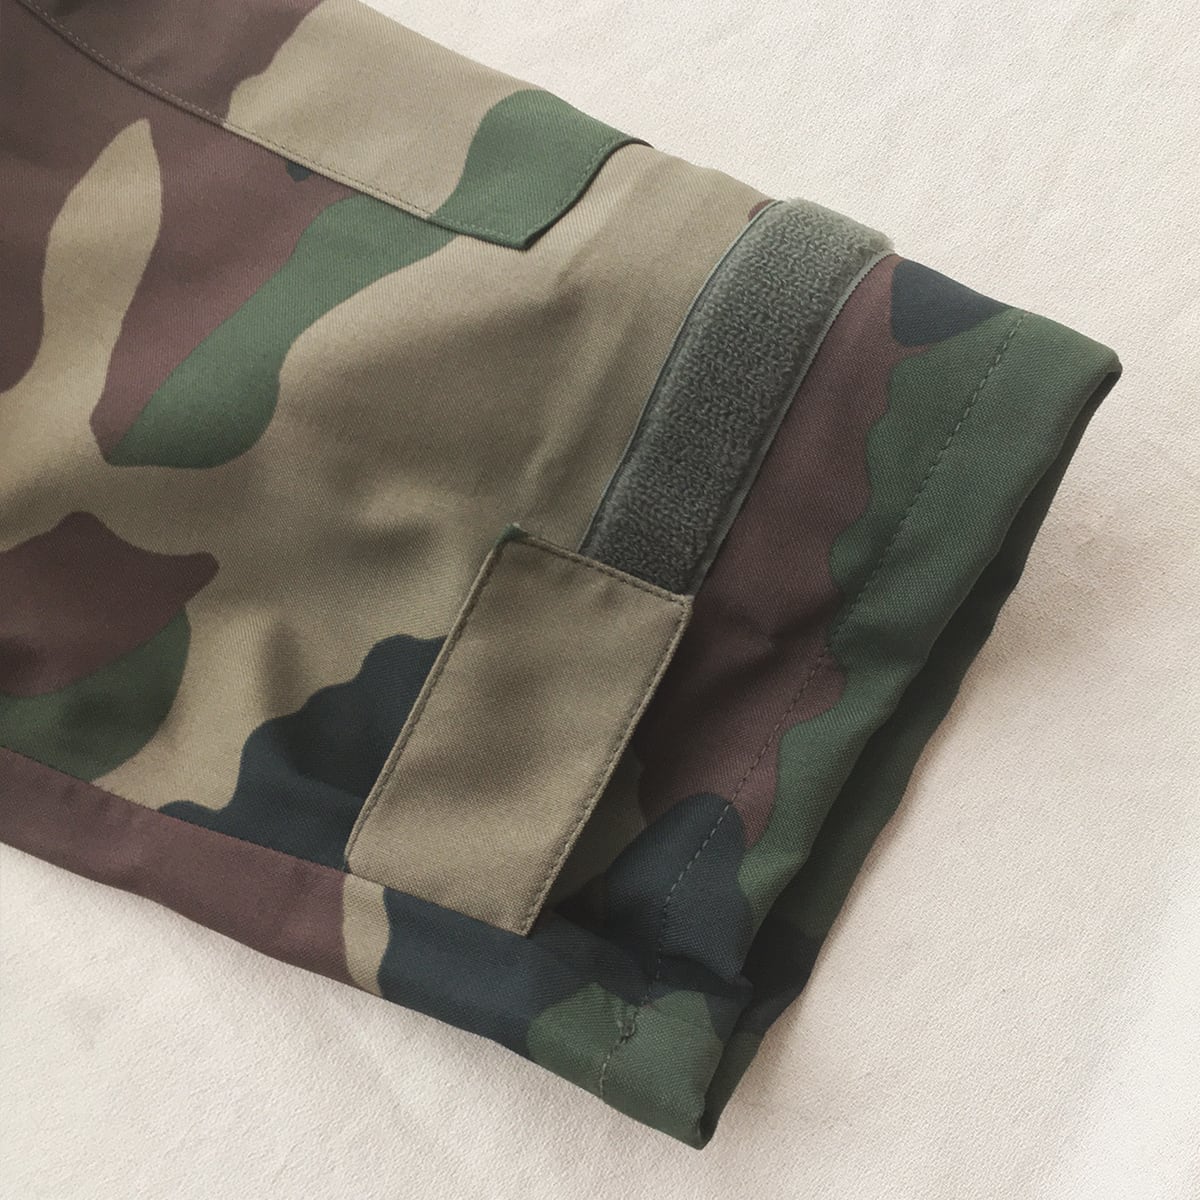 DEADSTOCK FRENCH ARMY CCE CAMO GORE-TEX FIELD JACKET ］フランス軍